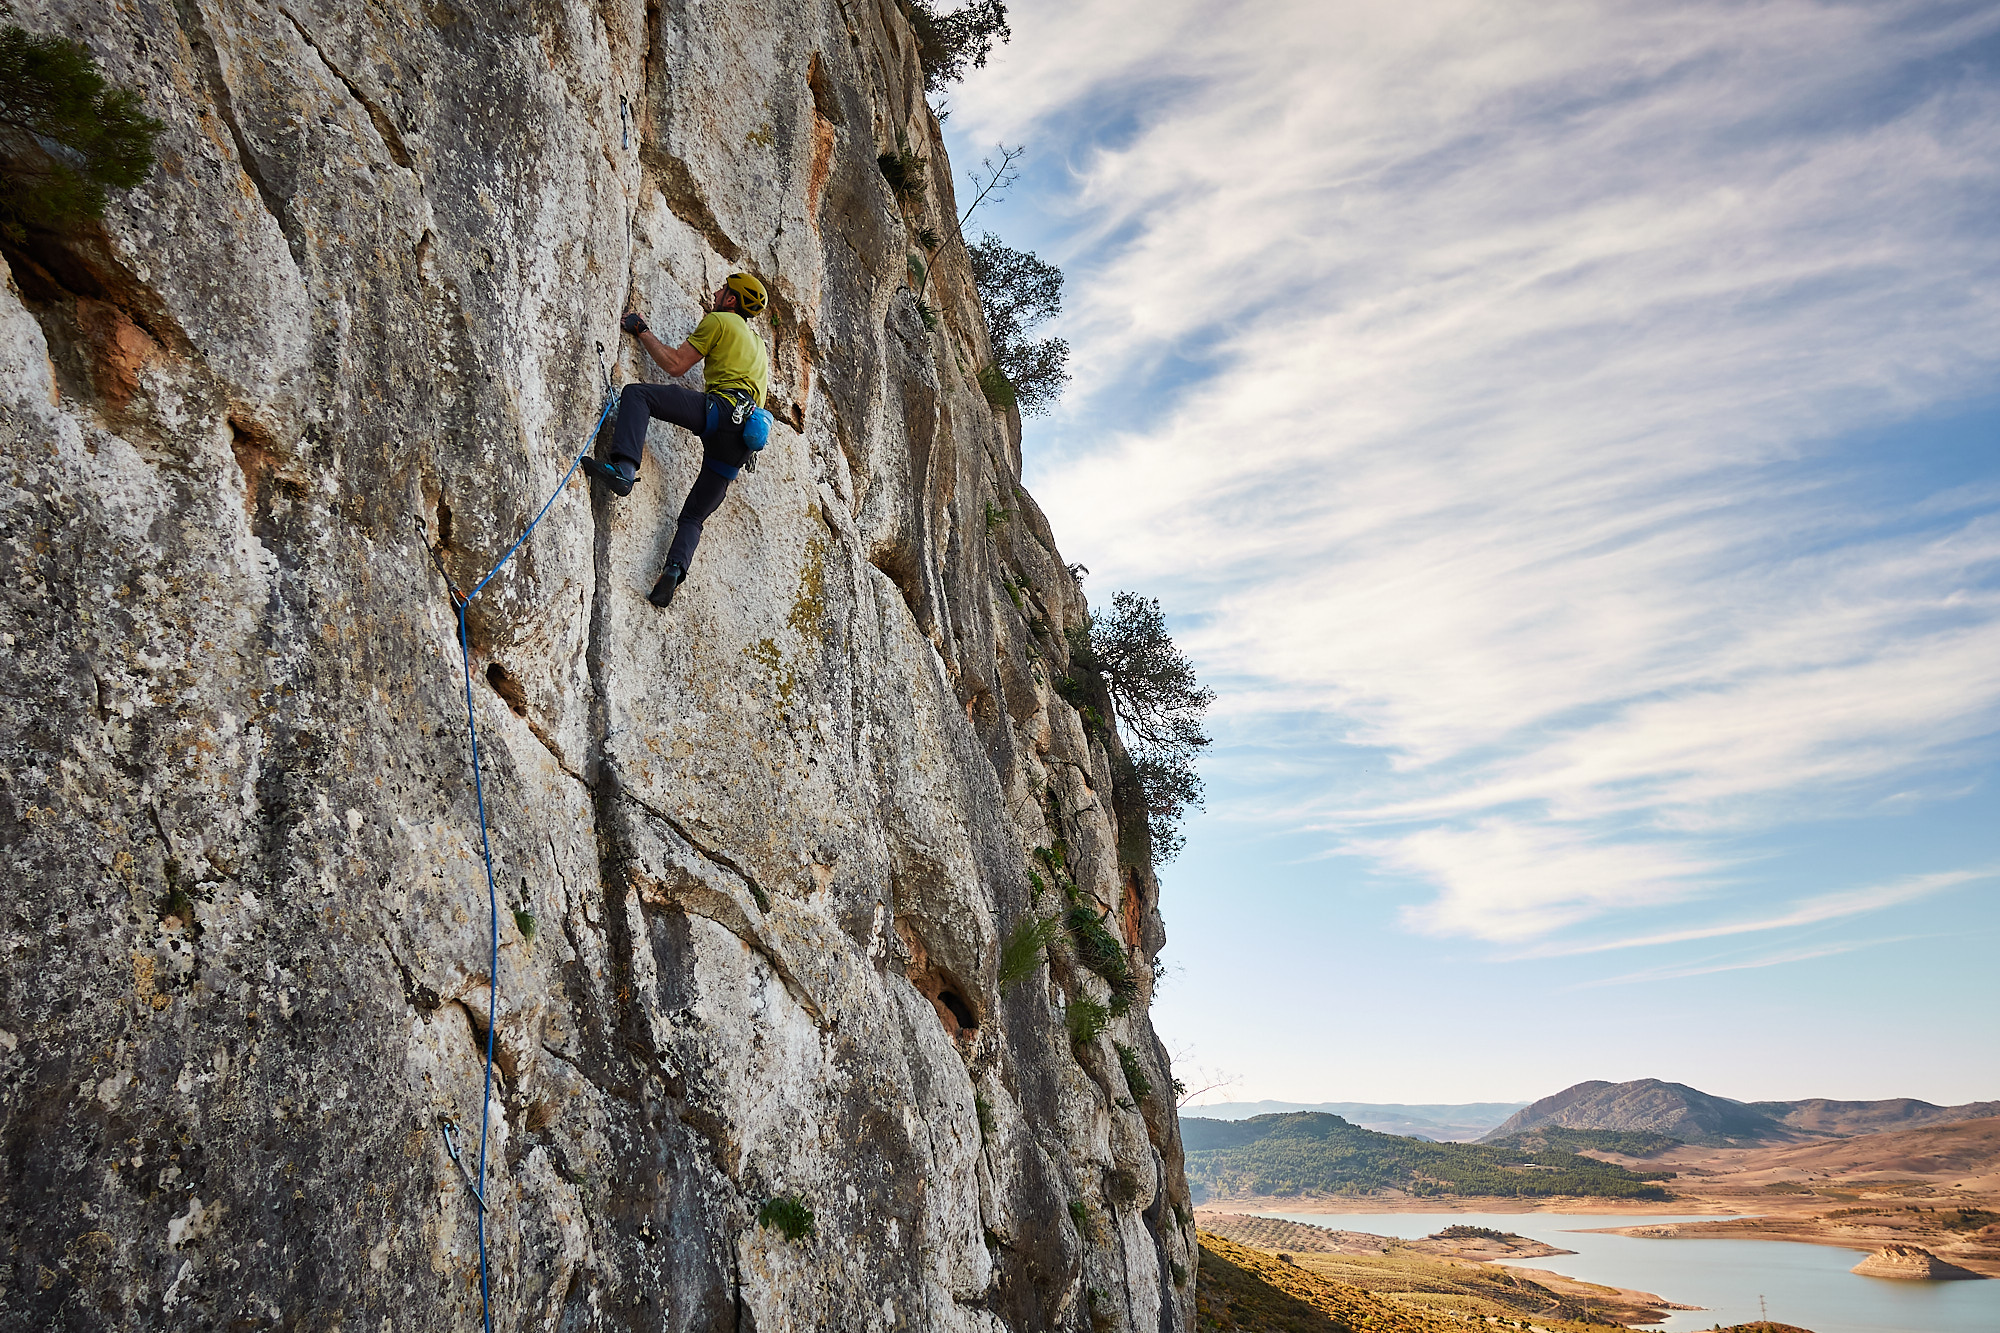 A climber sport climbing on a limestone crack in southern Spain with hills and a lake in the background